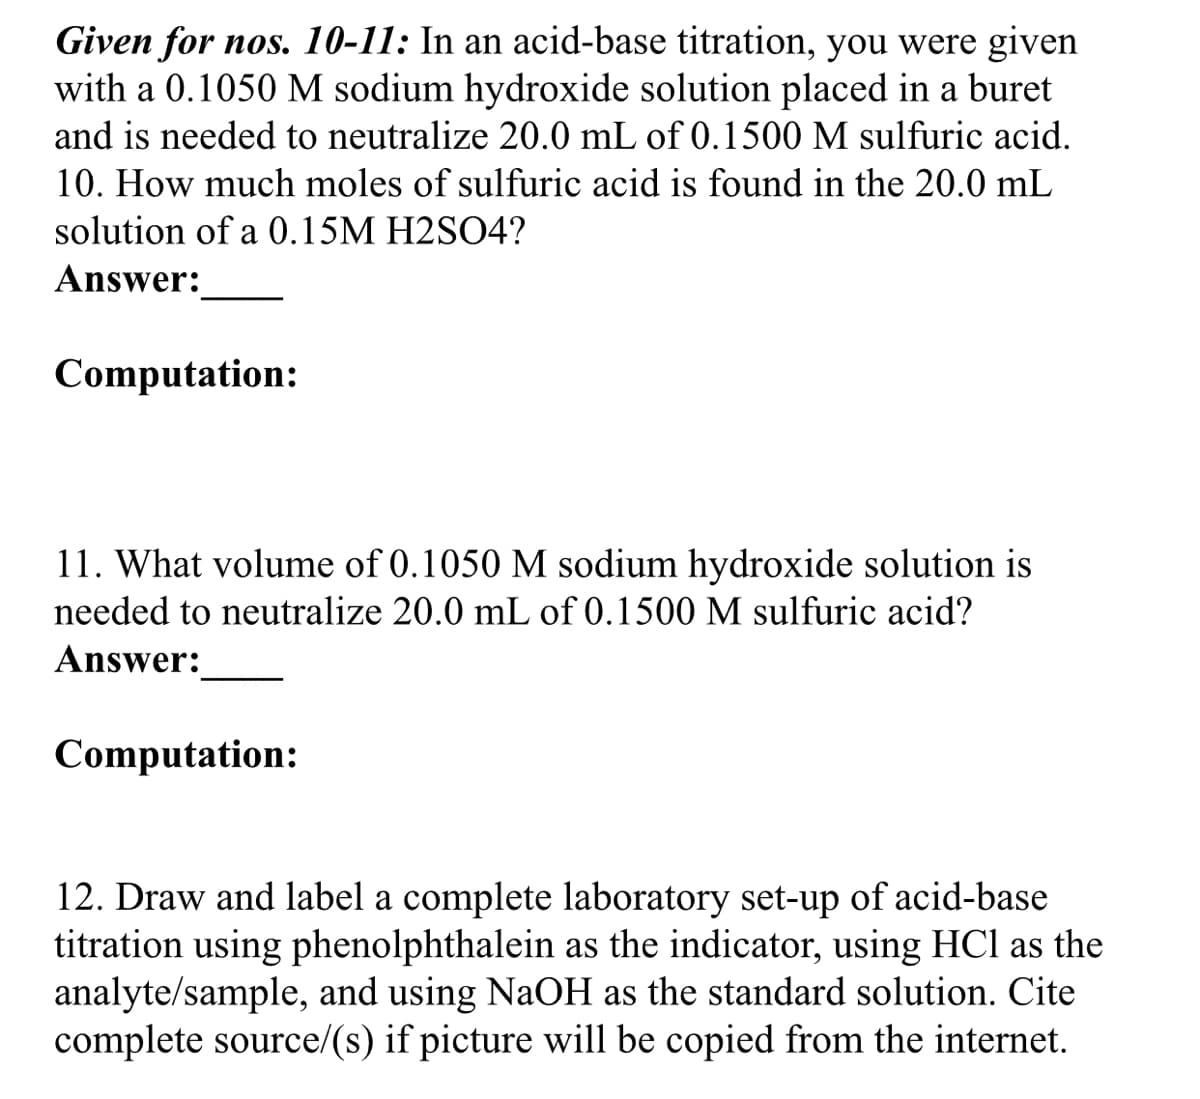 Given for nos. 10-11: In an acid-base titration, you were given
with a 0.1050 M sodium hydroxide solution placed in a buret
and is needed to neutralize 20.0 mL of 0.1500 M sulfuric acid.
10. How much moles of sulfuric acid is found in the 20.0 mL
solution of a 0.15M H2SO4?
Answer:
Computation:
11. What volume of 0.1050 M sodium hydroxide solution is
needed to neutralize 20.0 mL of 0.1500 M sulfuric acid?
Answer:
Computation:
12. Draw and label a complete laboratory set-up of acid-base
titration using phenolphthalein as the indicator, using HCl as the
analyte/sample, and using NaOH as the standard solution. Cite
complete source/(s) if picture will be copied from the internet.
